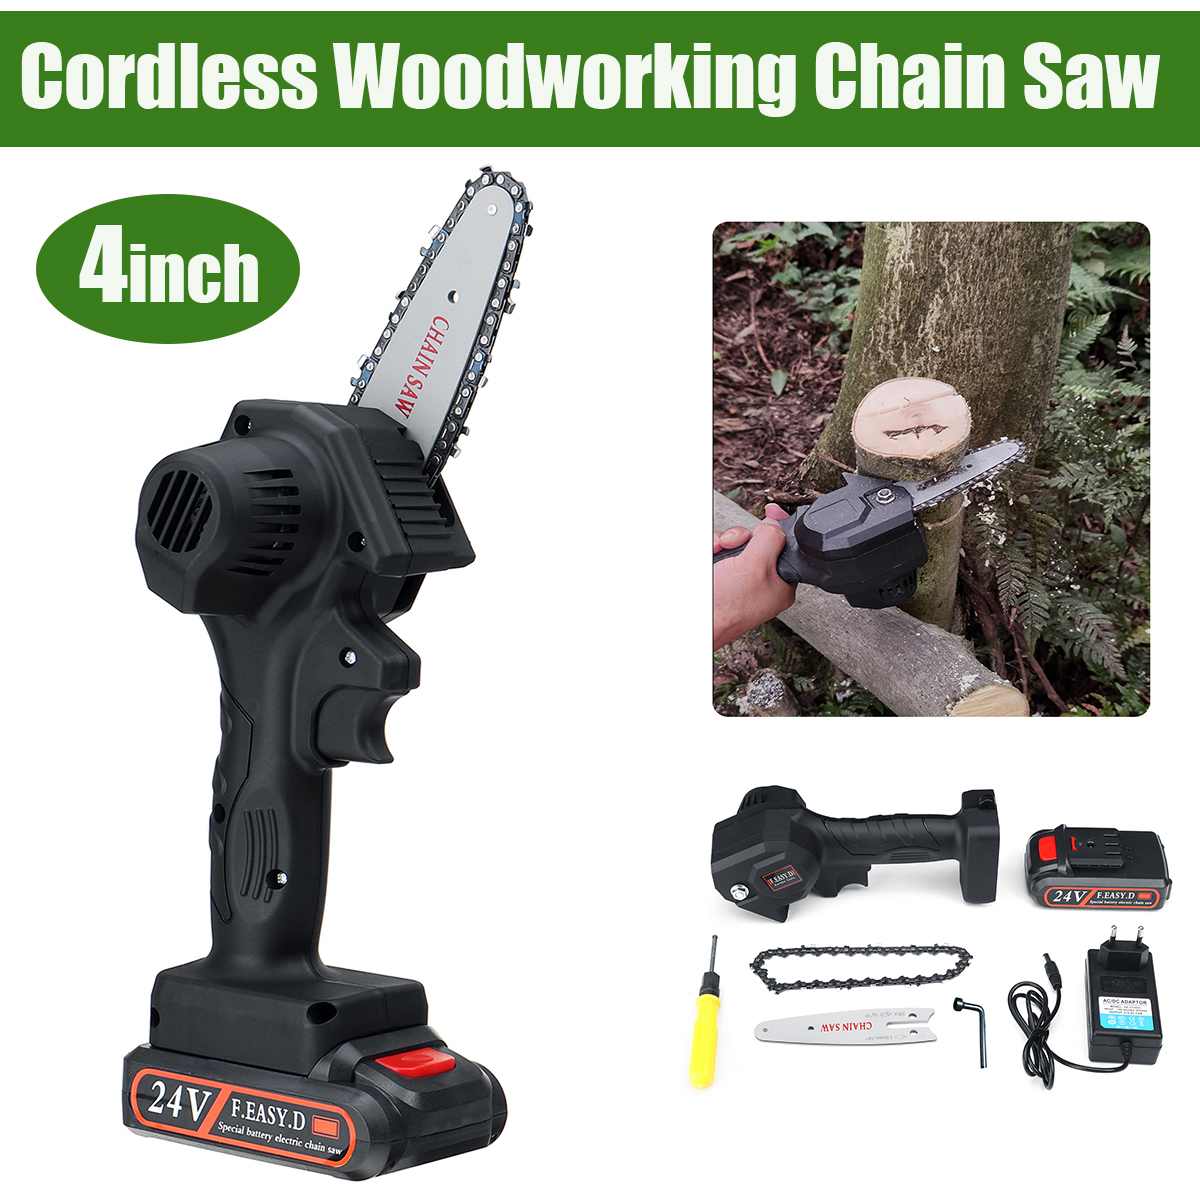 24V-Rechargeable-Cordless-Electric-Saw-Portable-Woodworking-Cutting-Tool-W-Battery-1788980-2